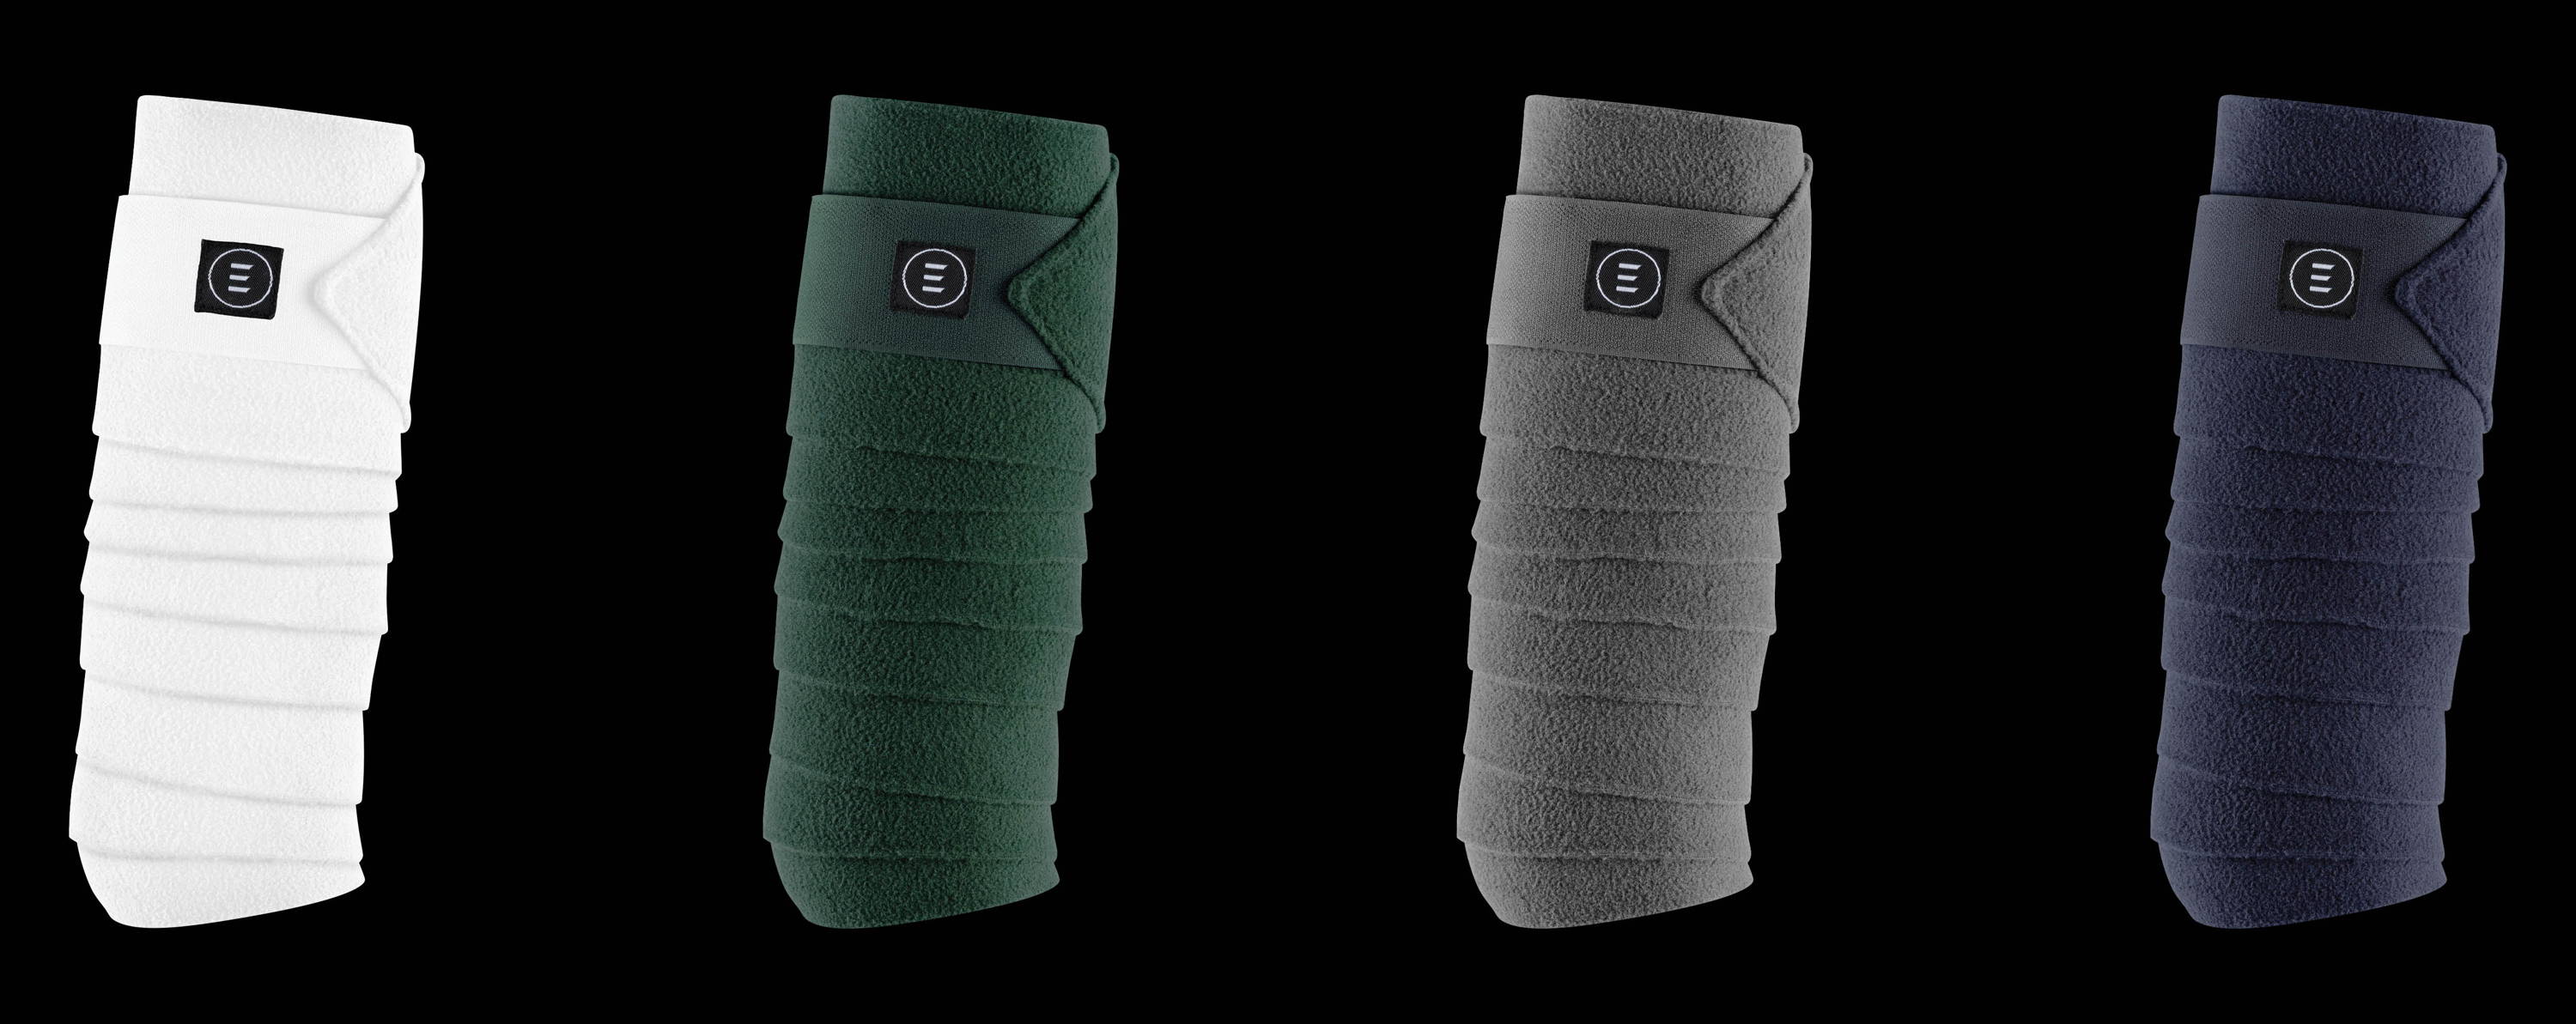 Essential Polo Wraps shown in White, Green, Grey, or Navy